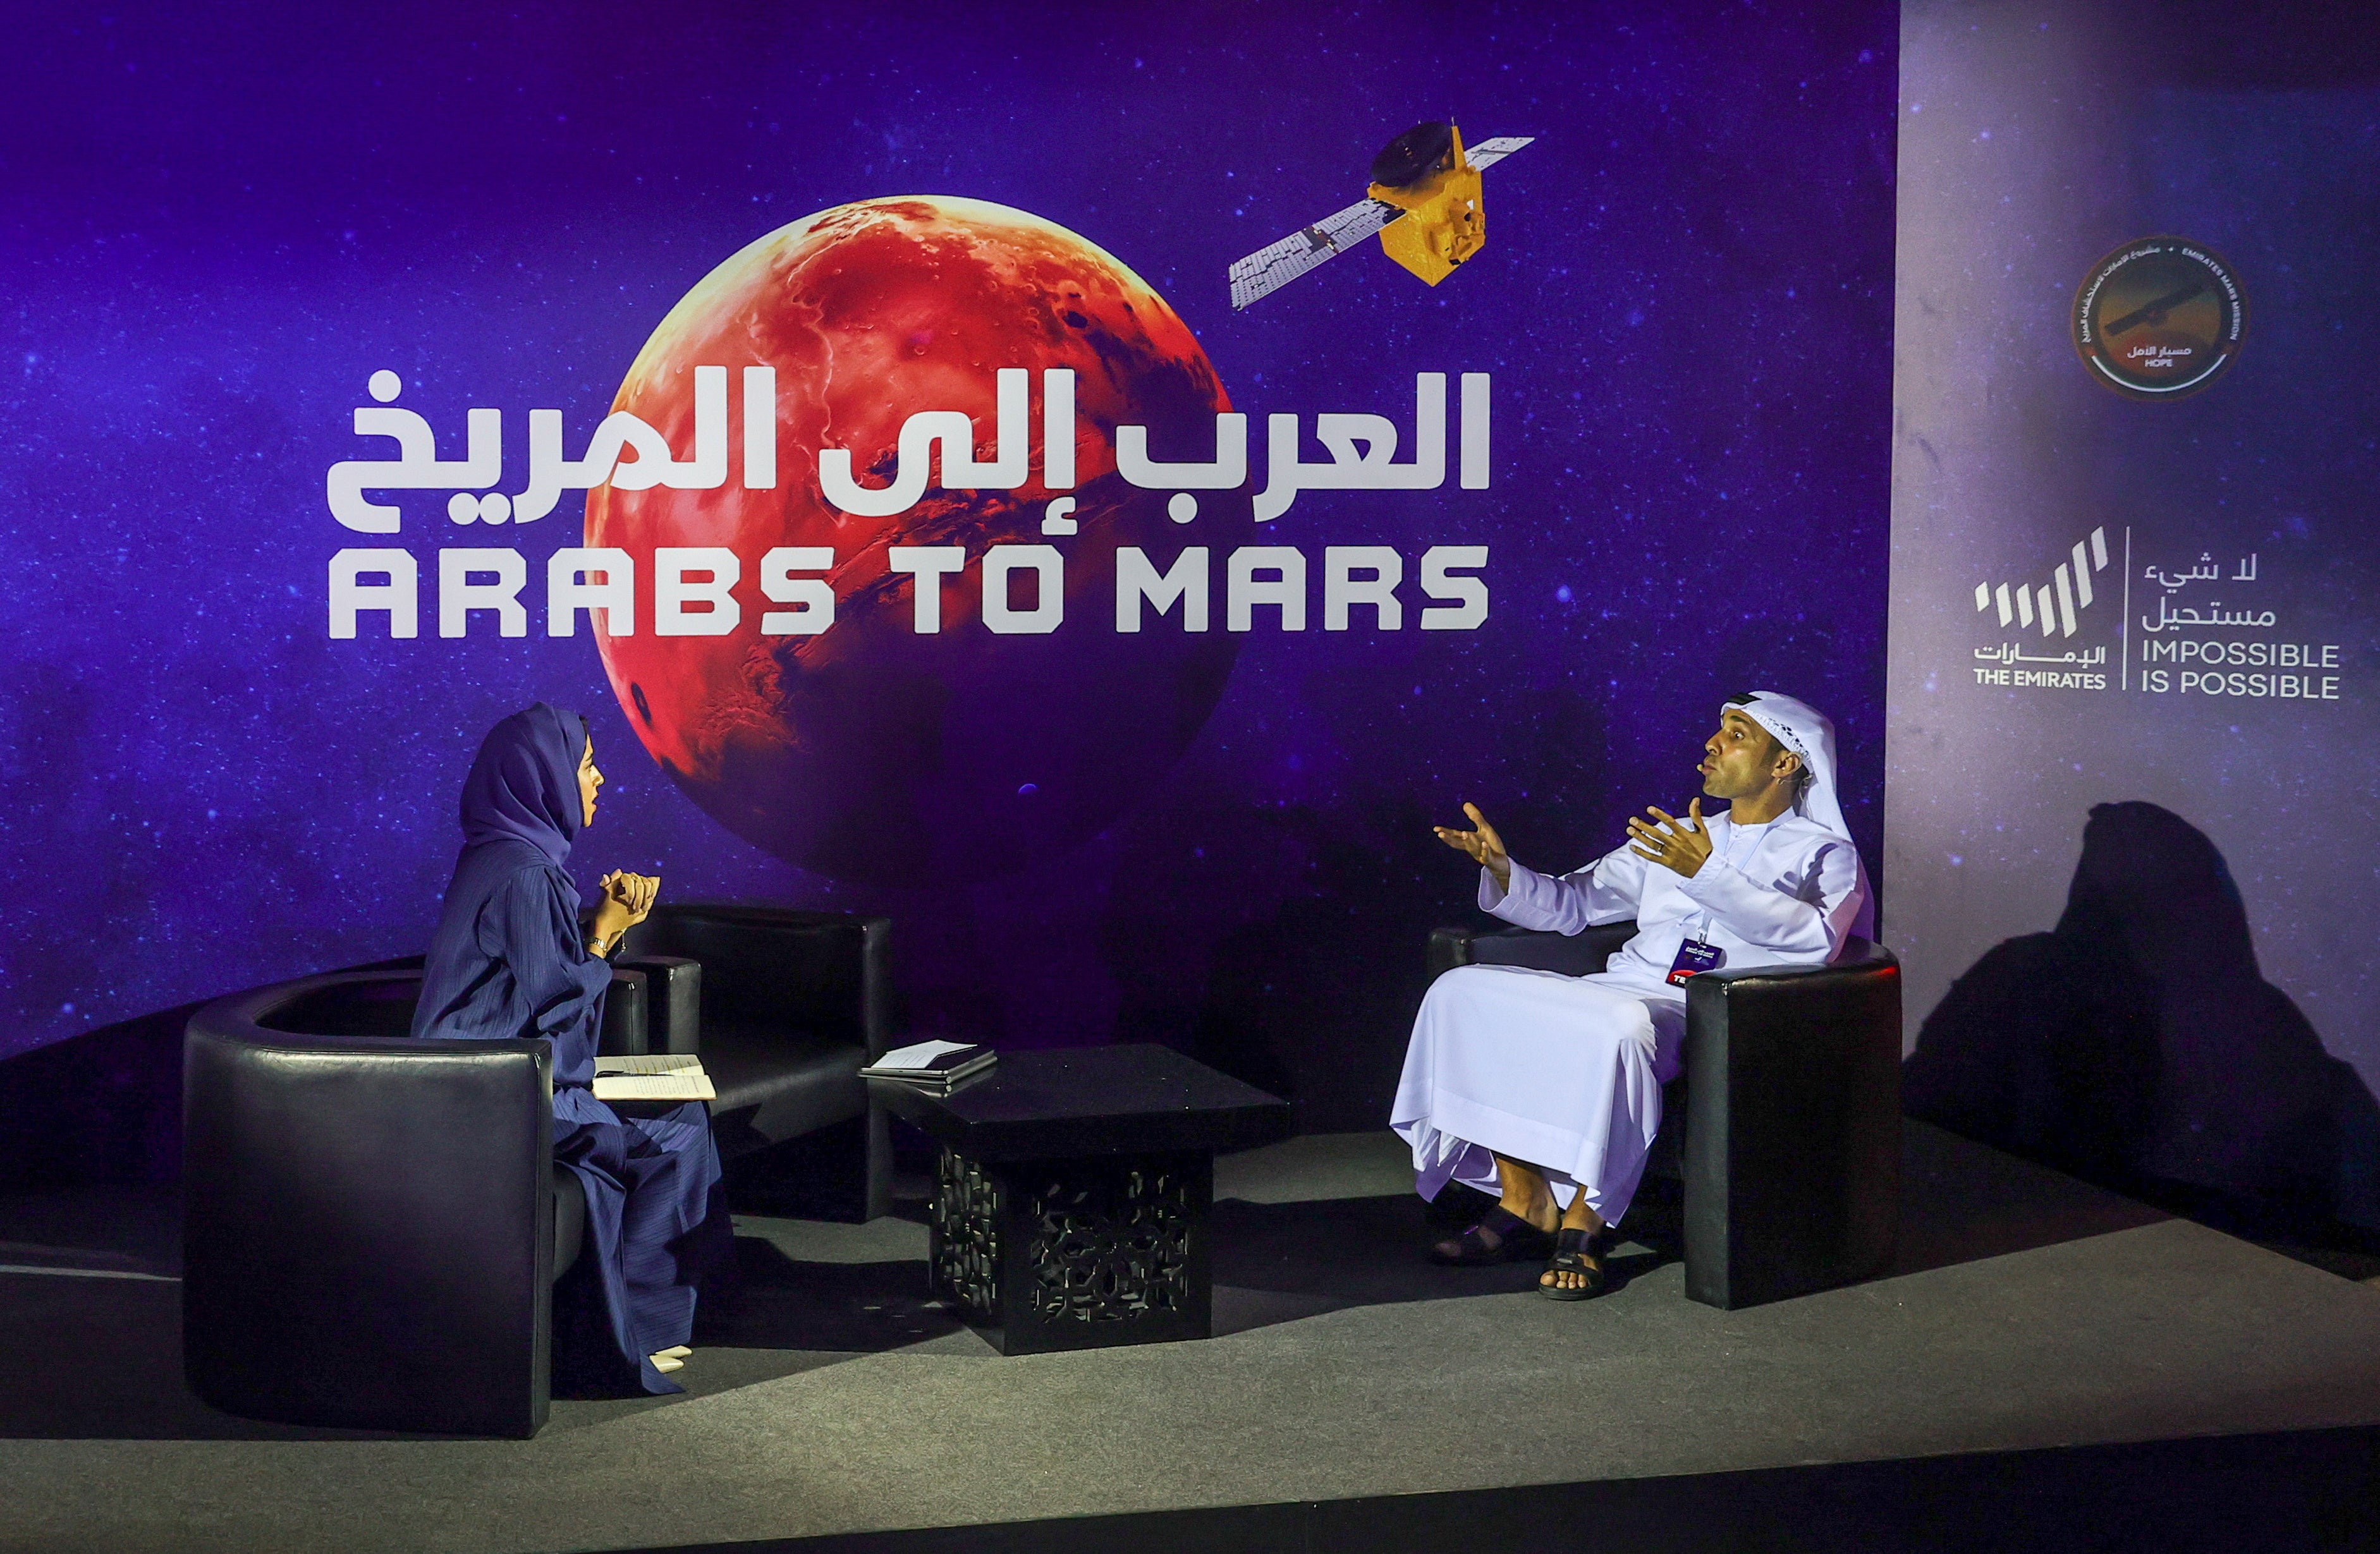 News reporters talk during an event in Dubai to mark the ‘Hope’ probe's entry into the orbit of Mars